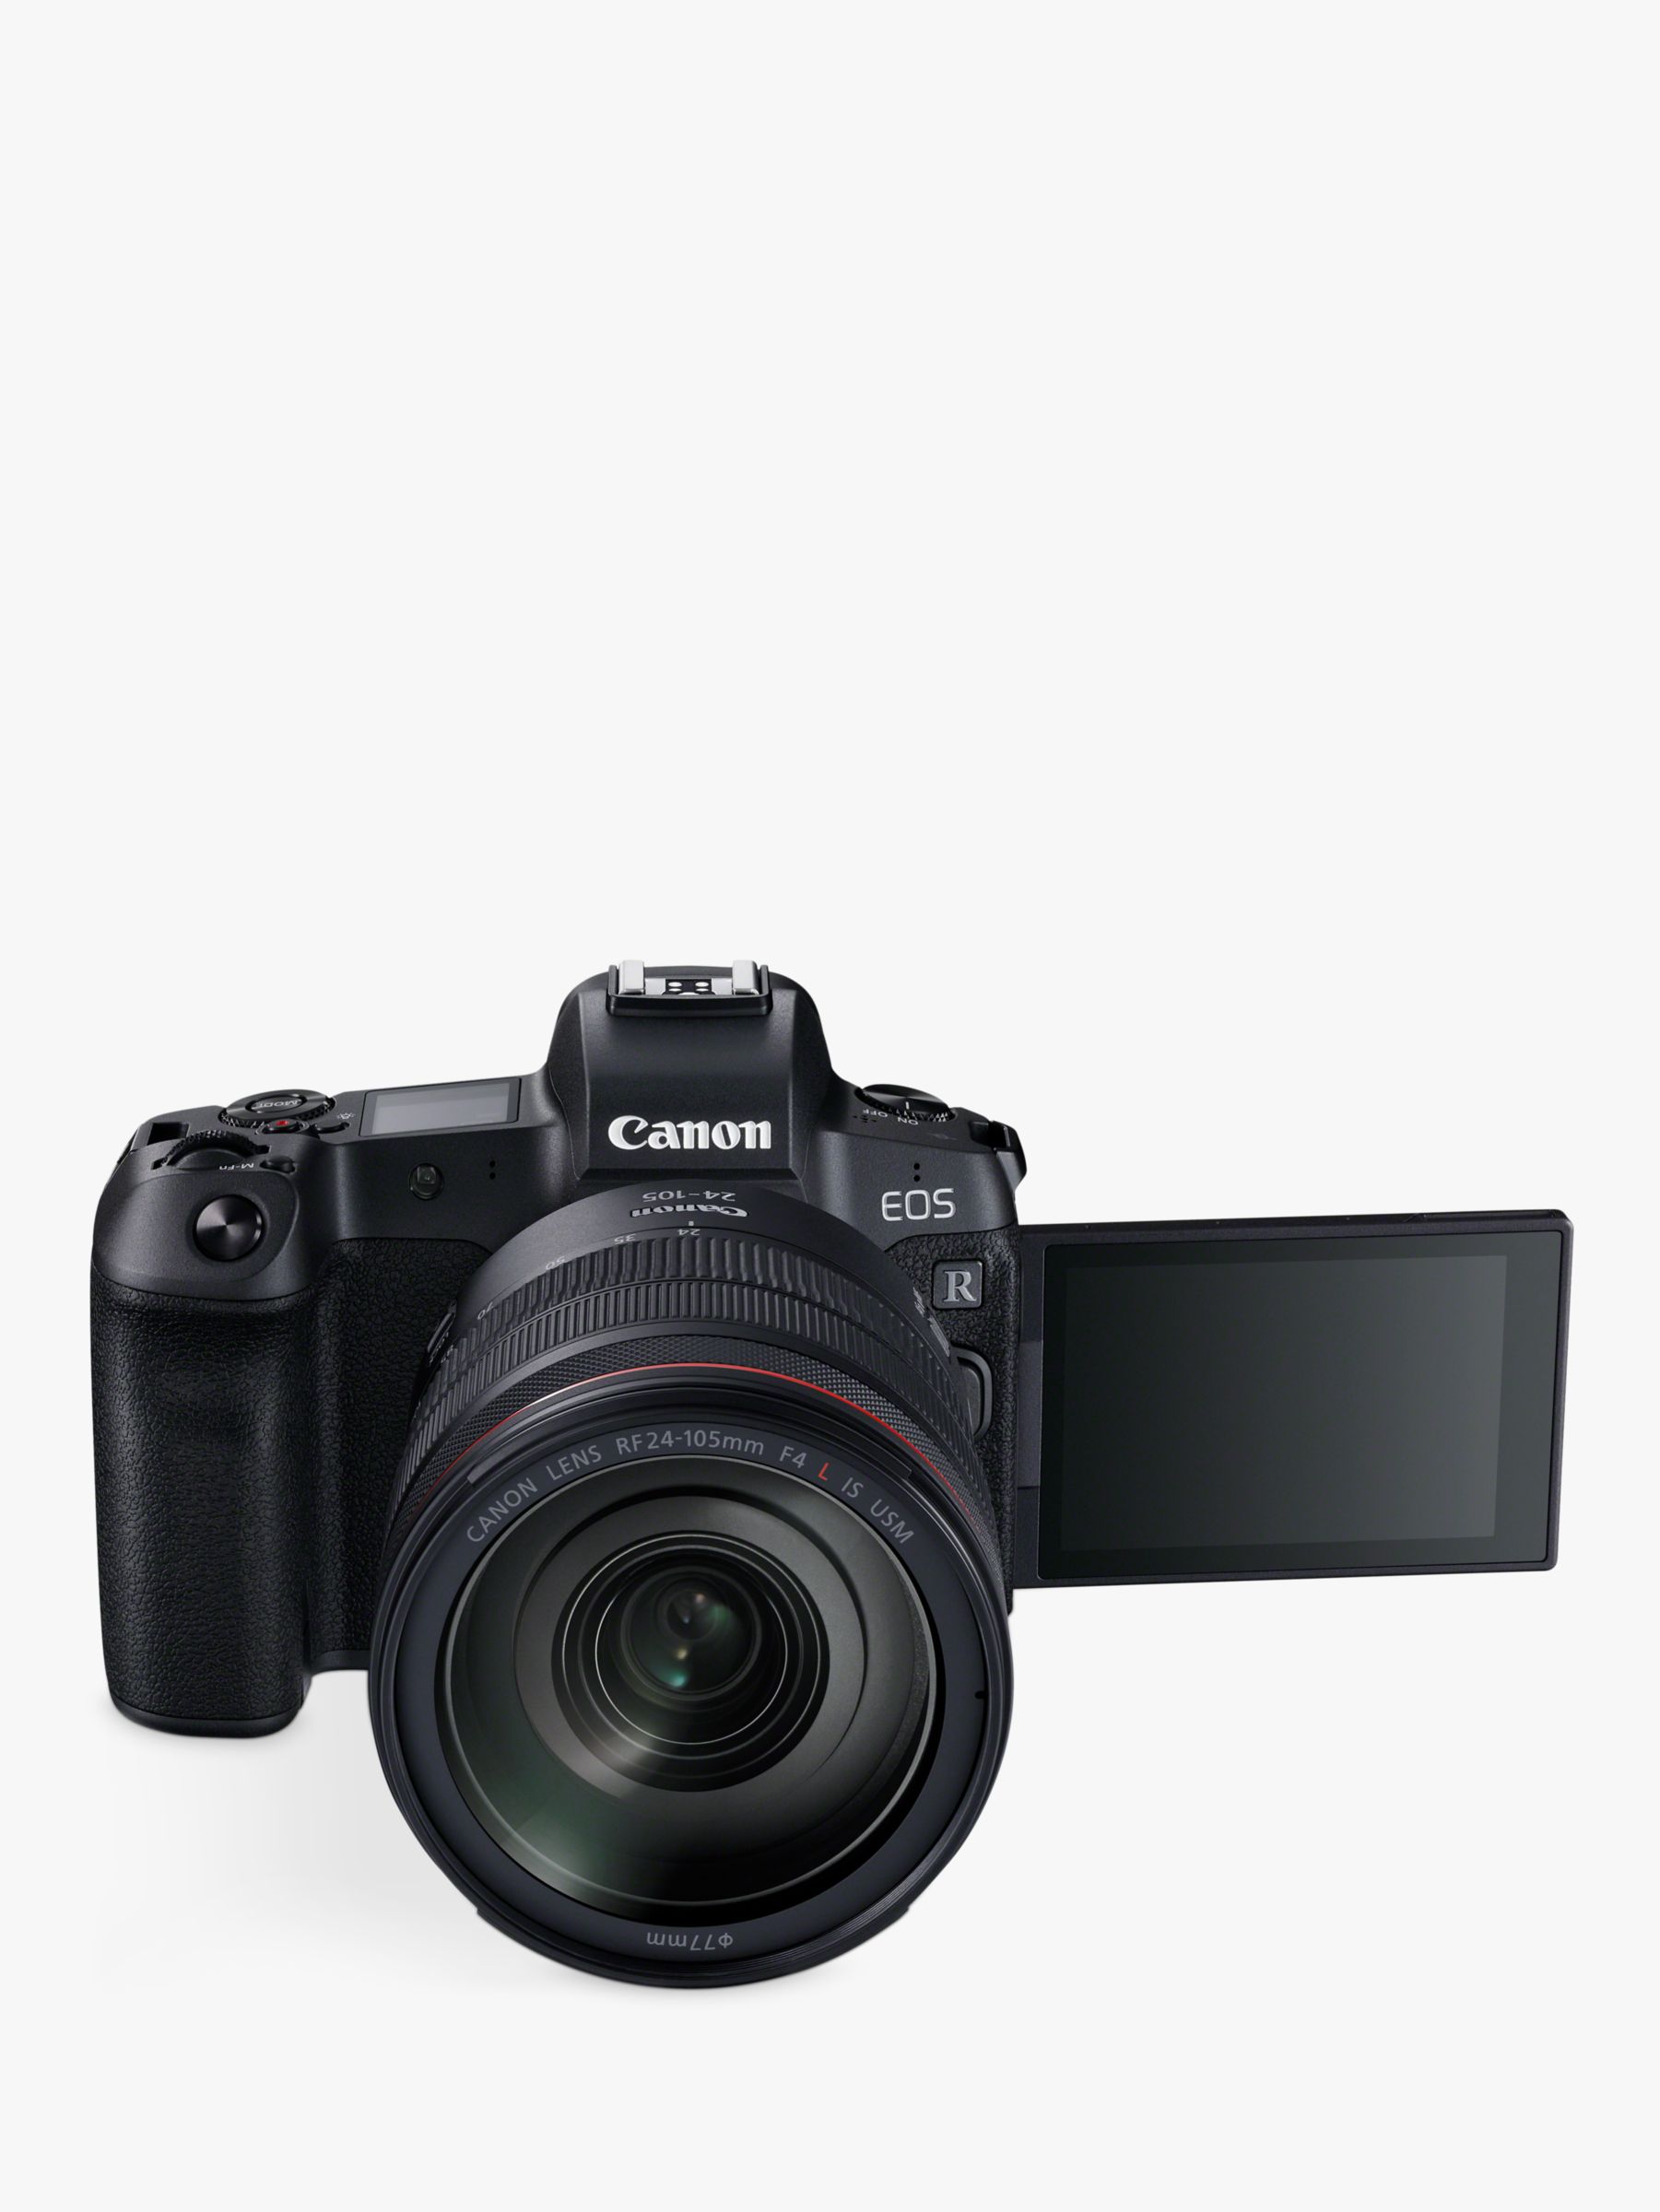 Canon EOS R Compact System Camera with RF 24-105mm IS USM Lens, 4K Ultra HD, 30.3MP, Wi-Fi, Bluetooth, OLED EVF, 3.1 Vari-Angle Touch Screen with EF Mount Adapter